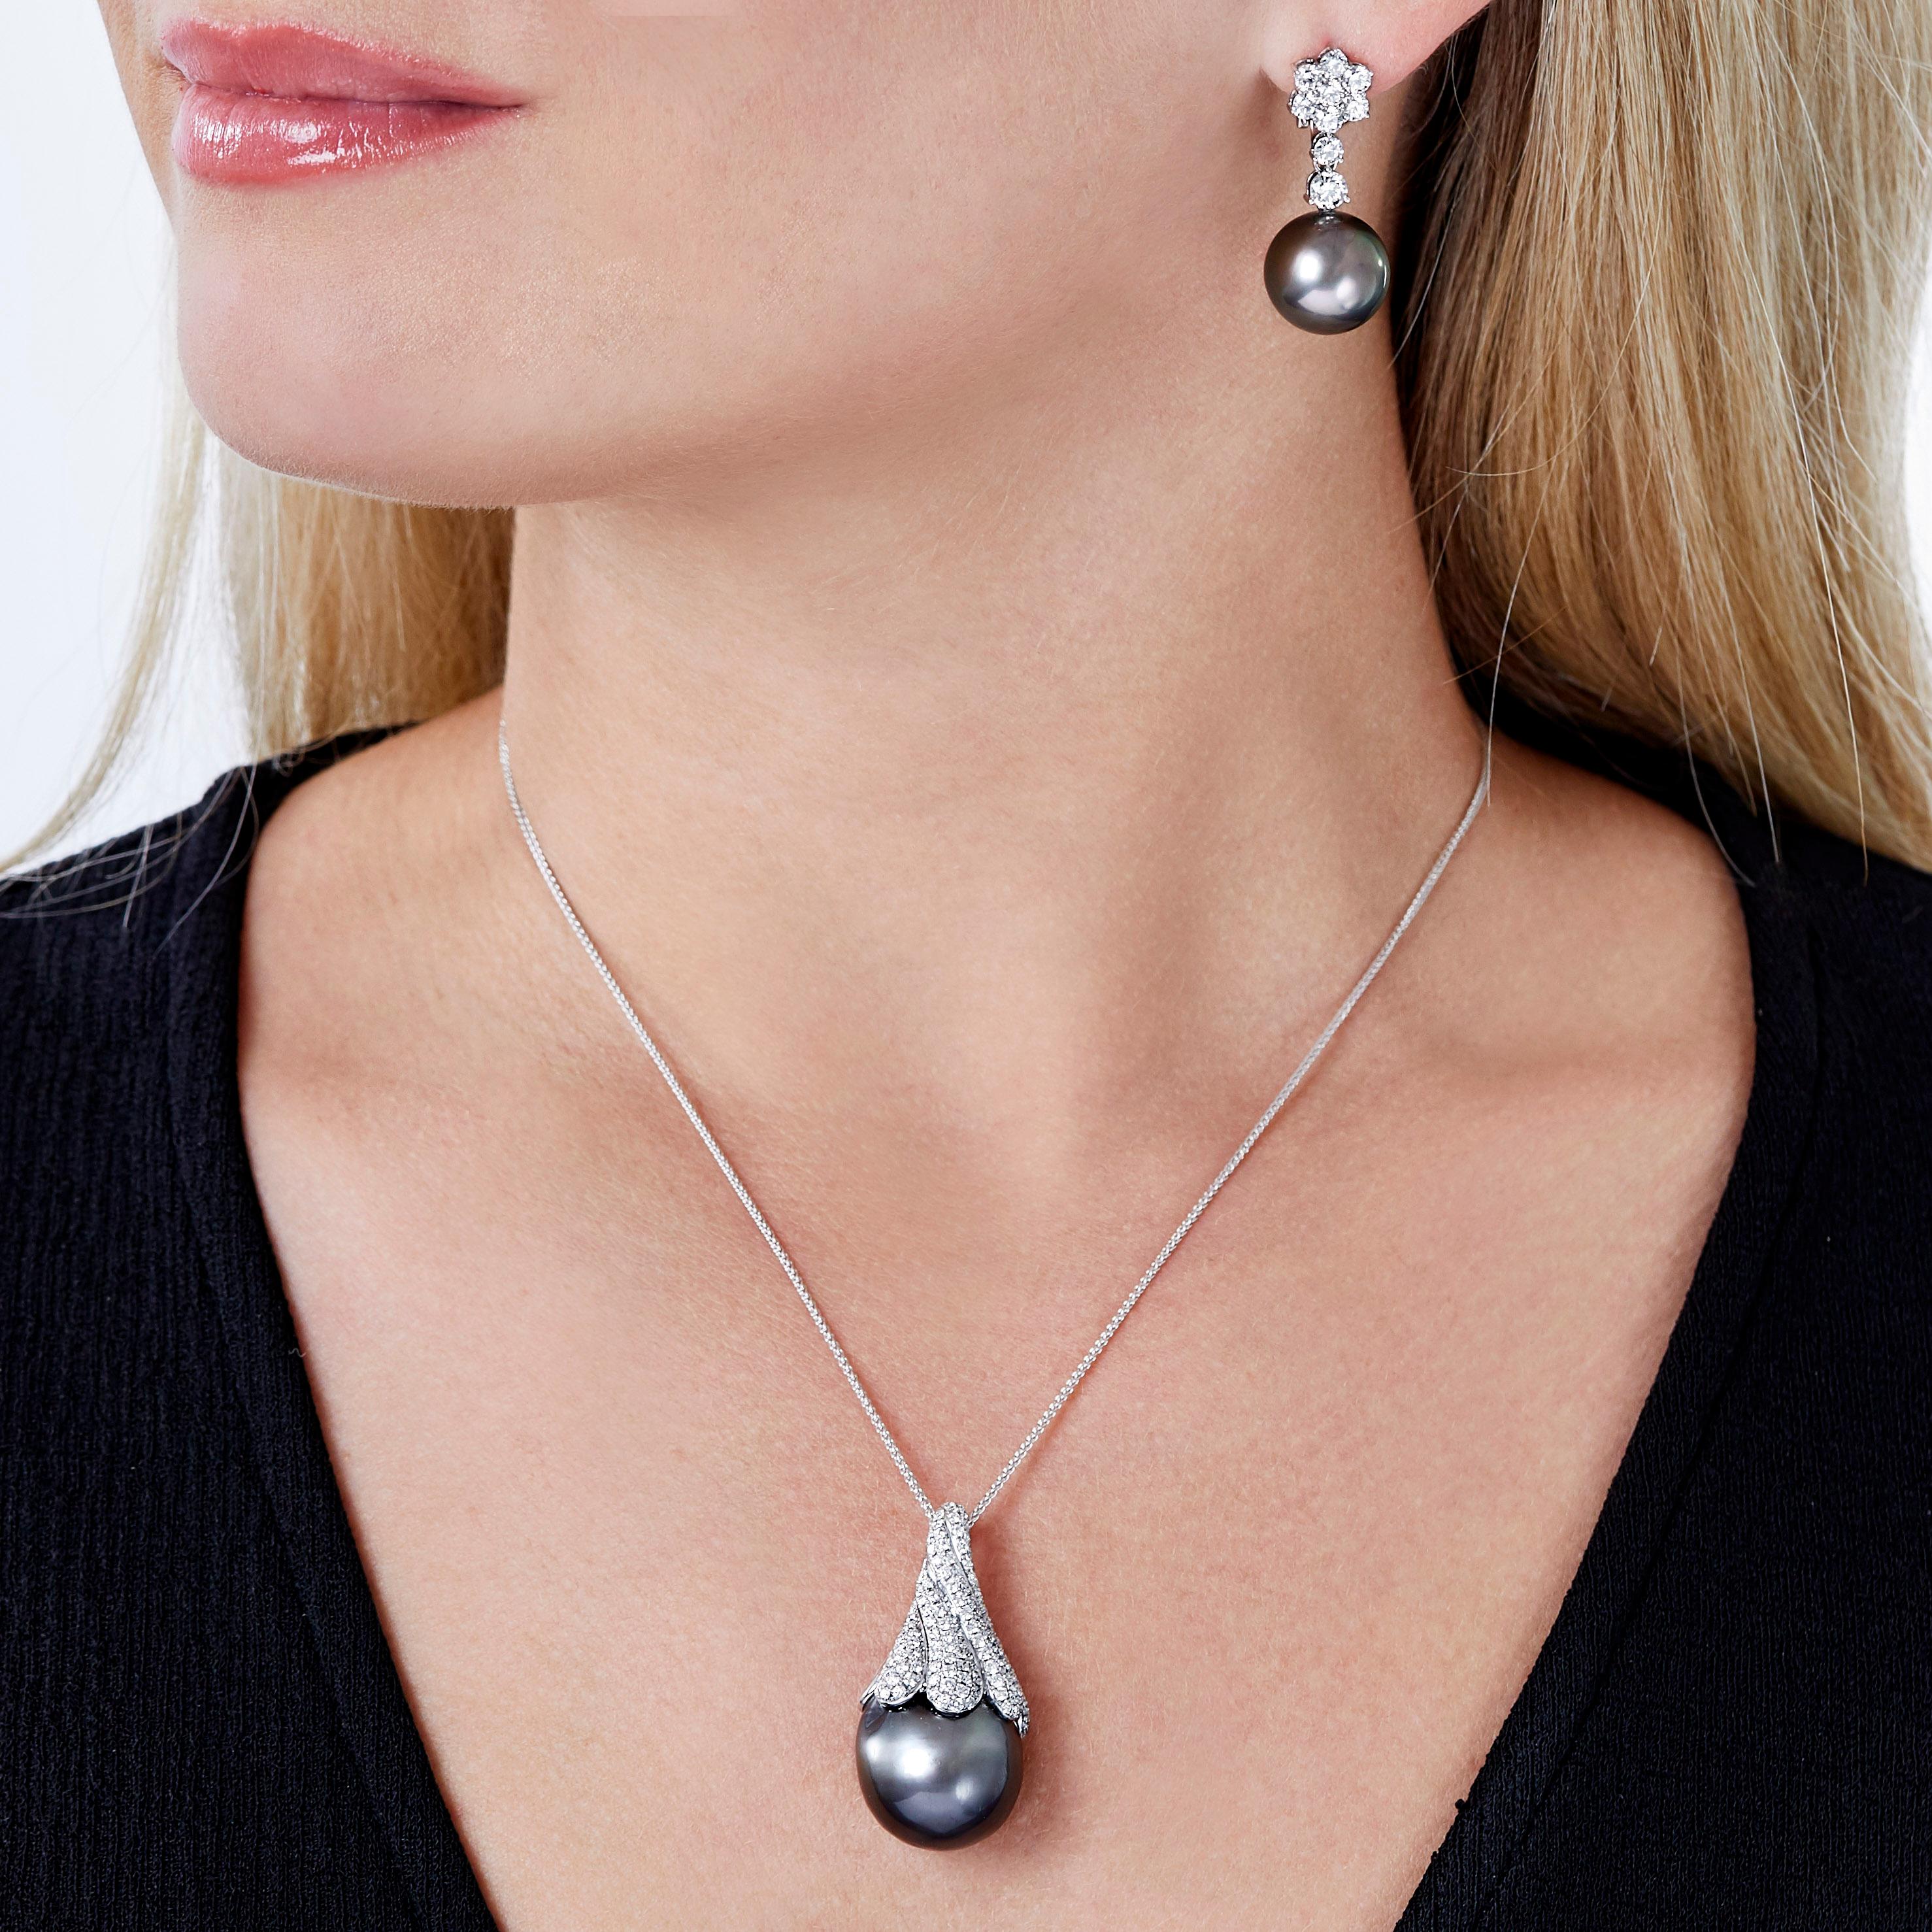 This unique pendant by Yoko London features a spectacular 17.8mm Tahitian pearl beneath 1.66cts of diamonds. This striking pendant will make a statement each and every time it is worn. 
- 17.8mm Tahitian Pearl 
- 1.66cts of diamonds
- 18K white